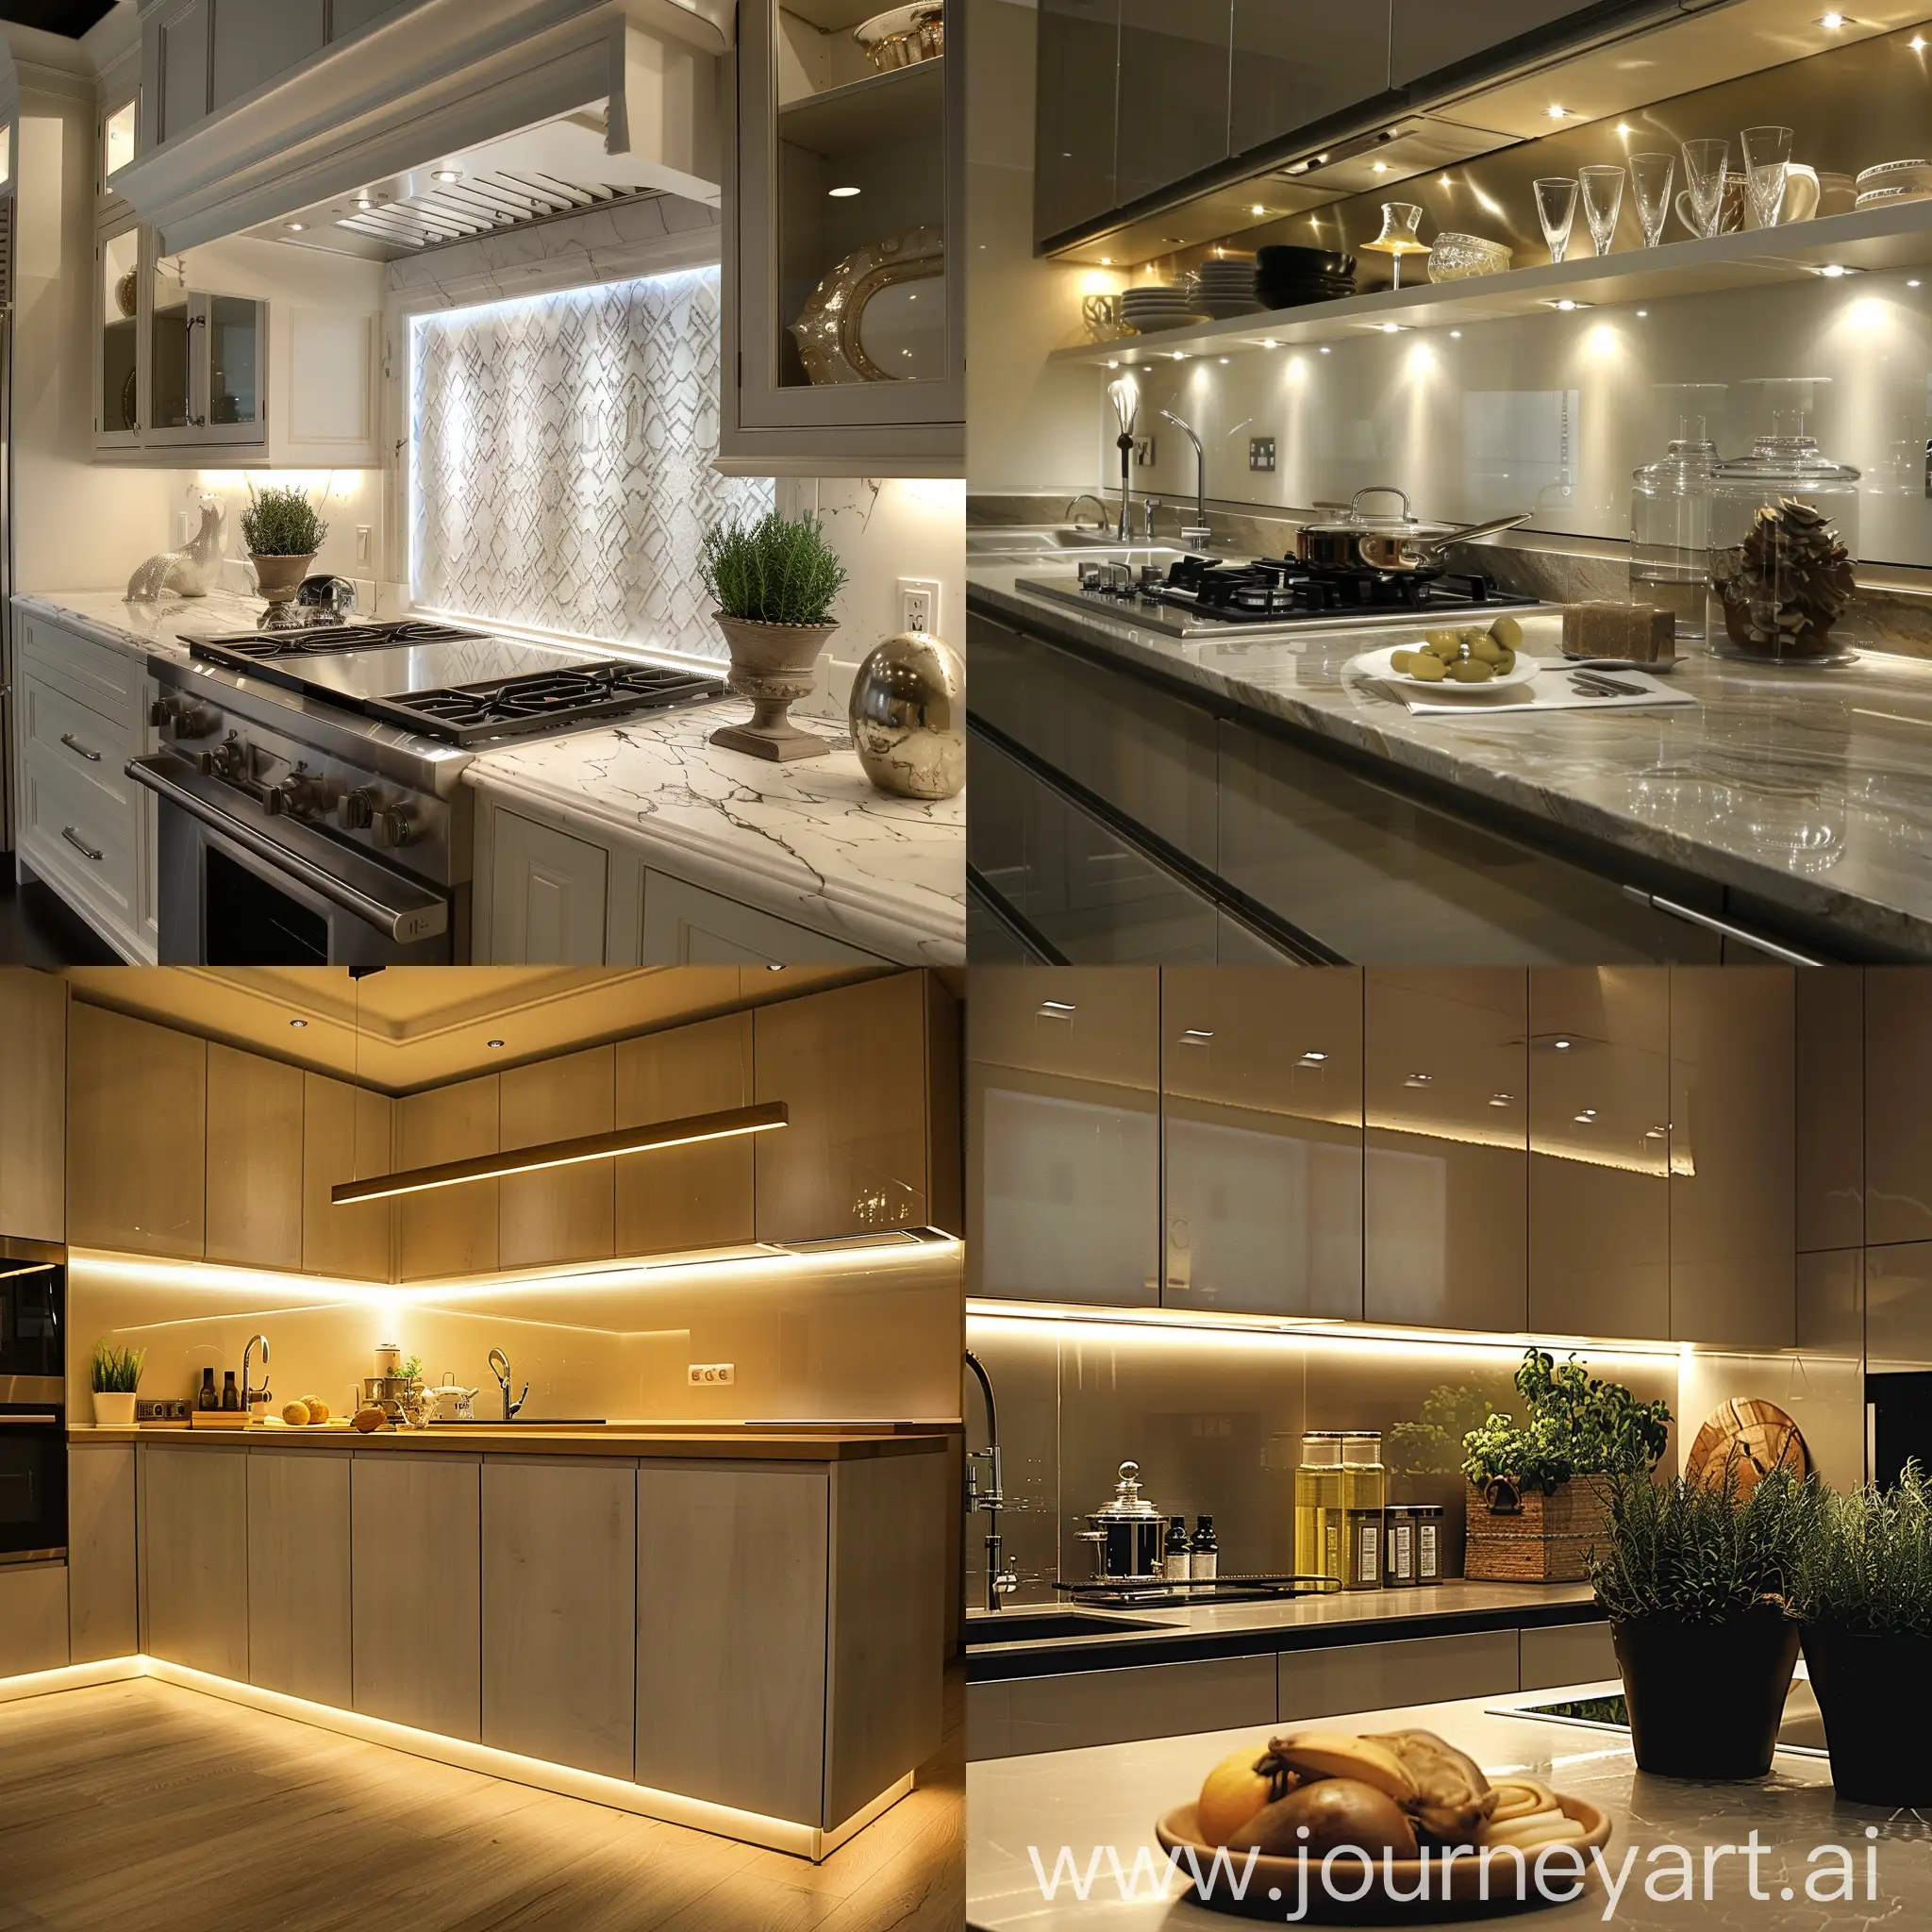 Exquisite and beautiful kitchen, cabinet lights emit soft light.